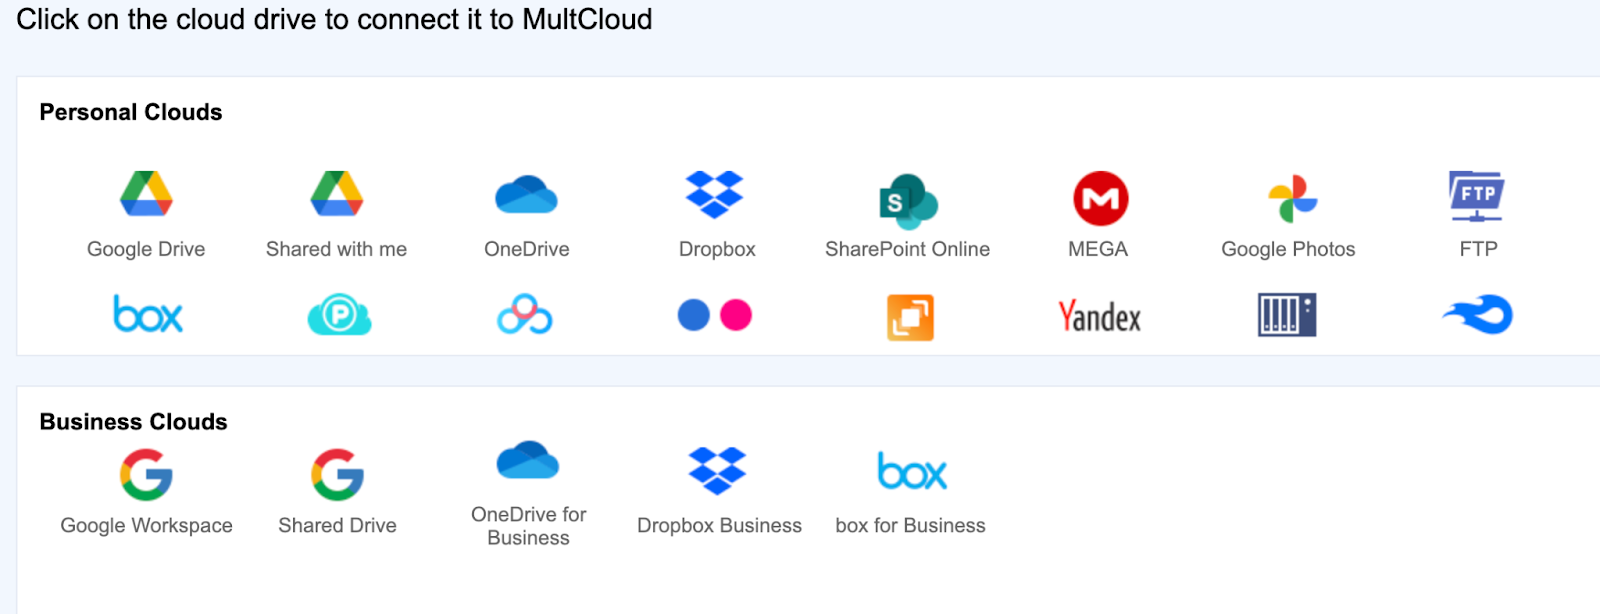 Cloud options in the free migration tool MultCloud